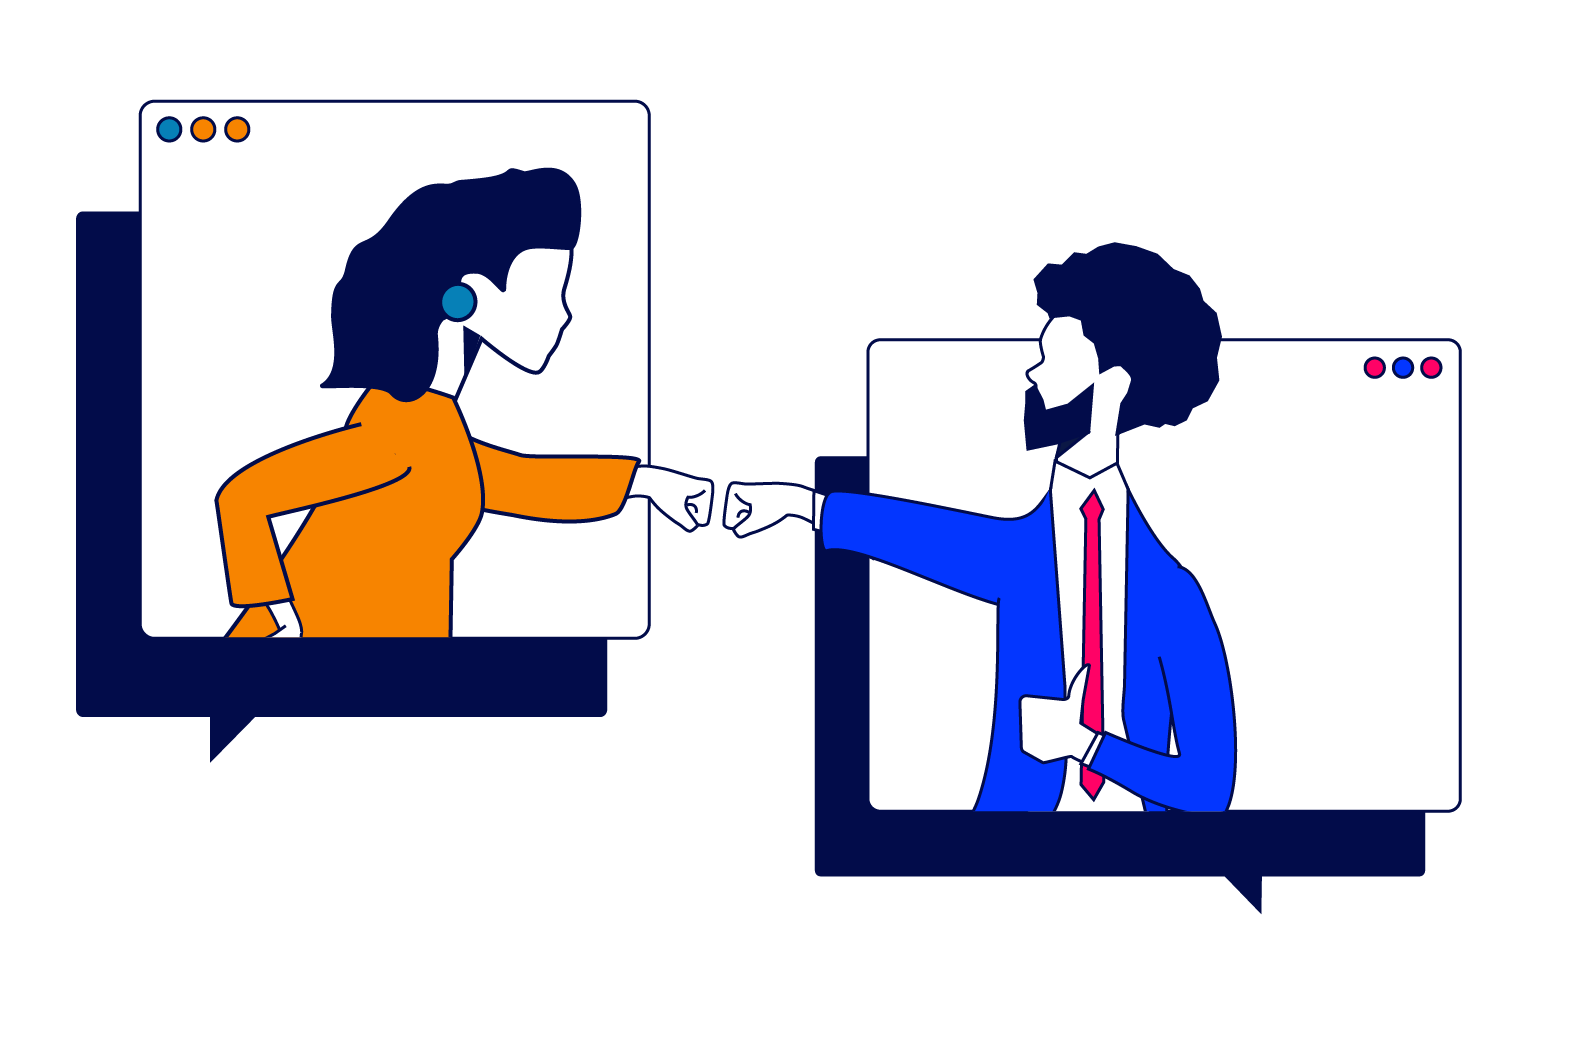 A colorful graphic of a woman in orange fist bumping a man in a suit